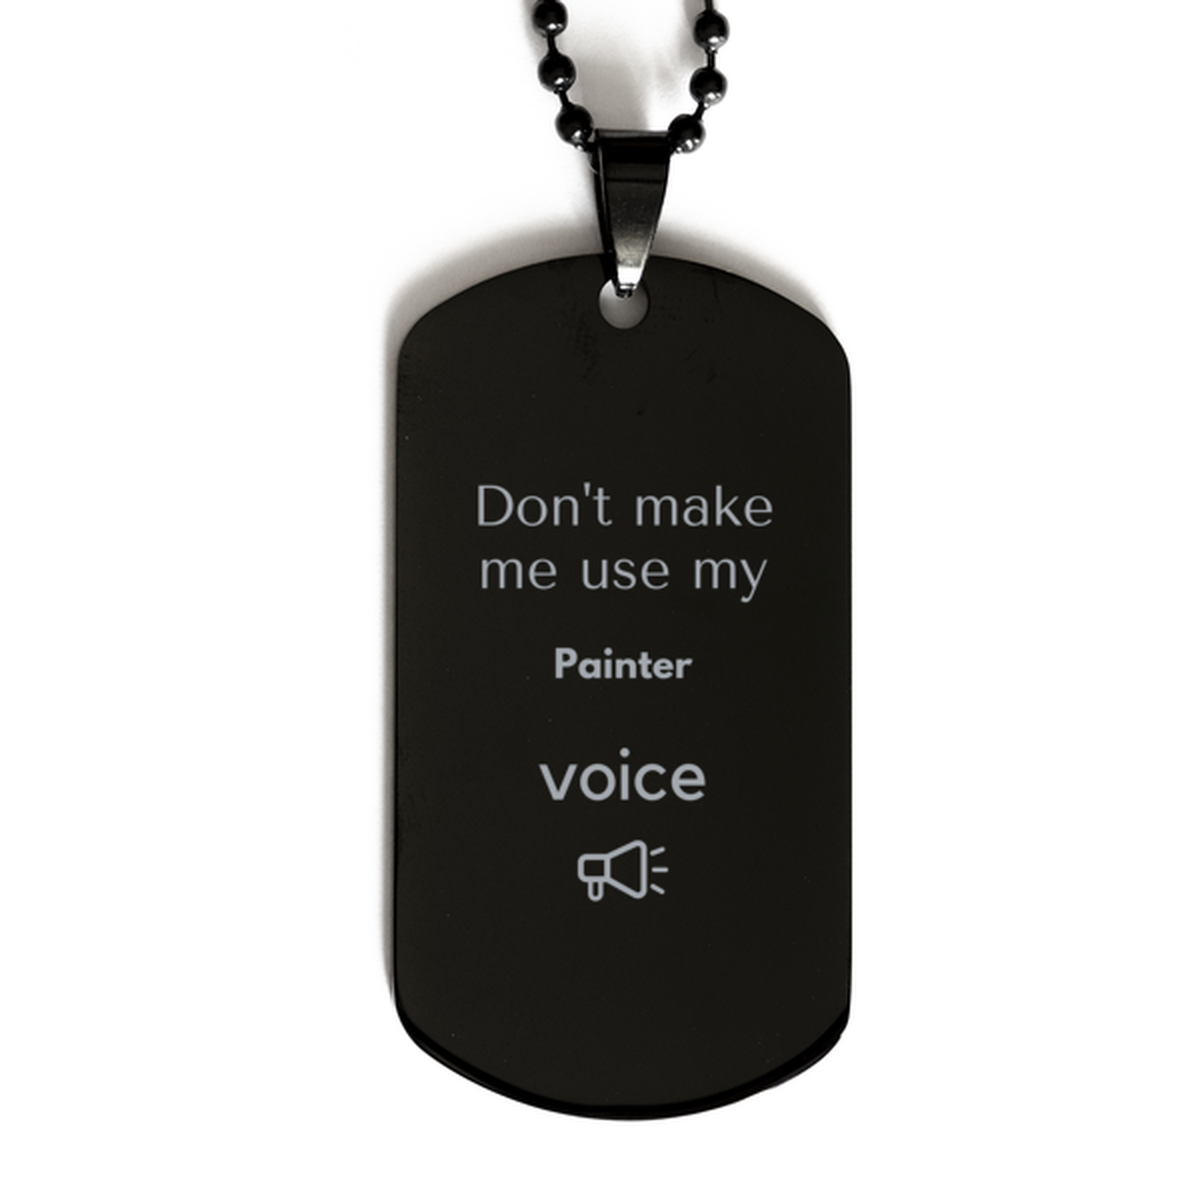 Don't make me use my Painter voice, Sarcasm Painter Gifts, Christmas Painter Black Dog Tag Birthday Unique Gifts For Painter Coworkers, Men, Women, Colleague, Friends